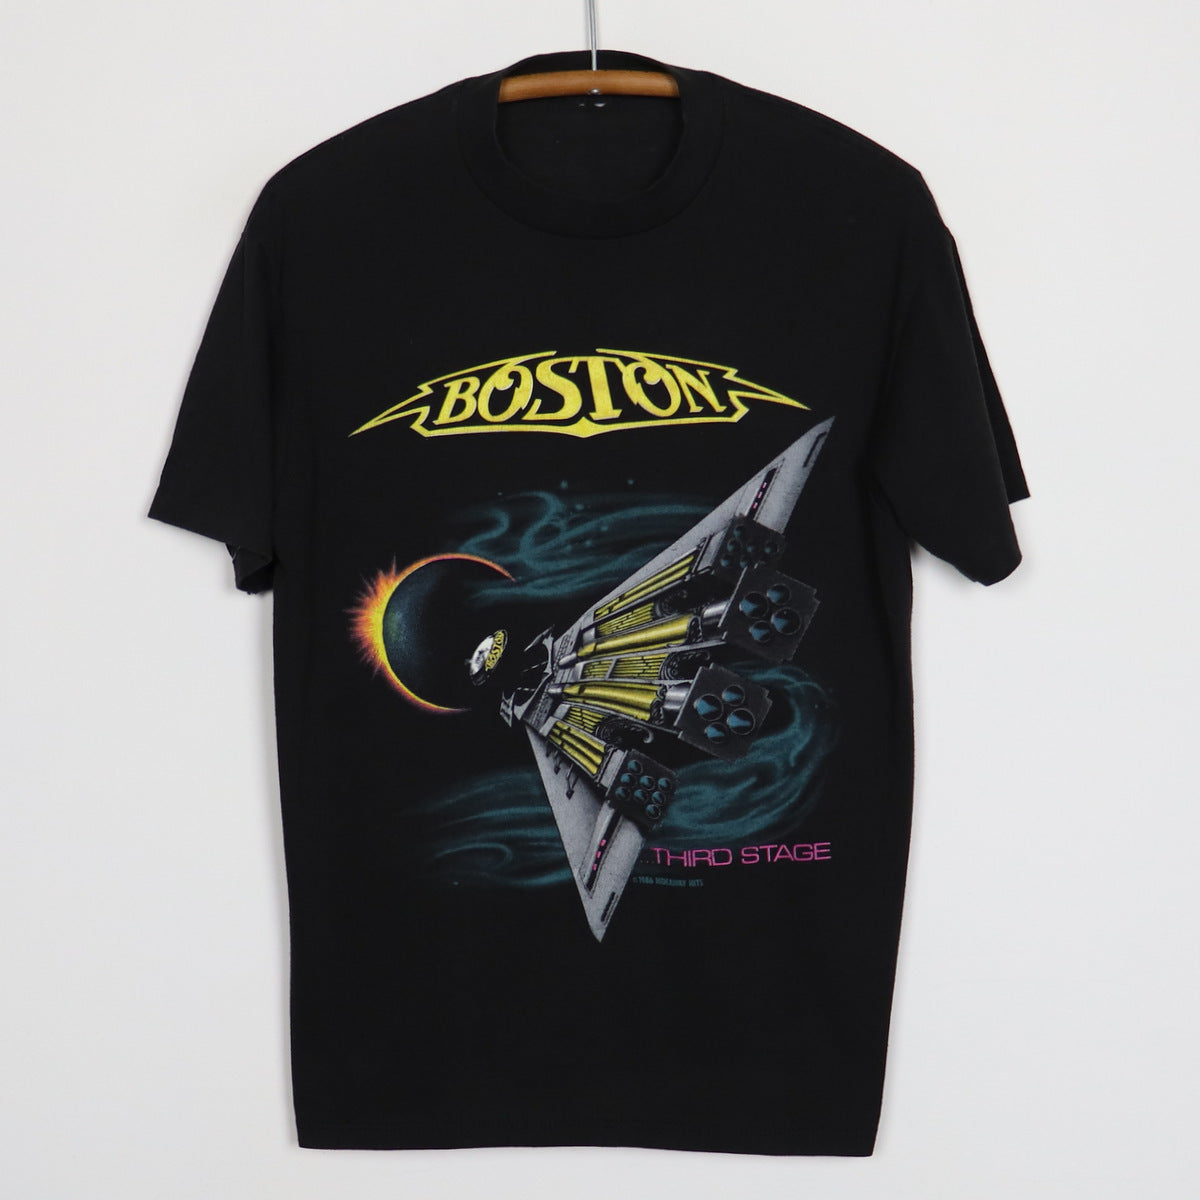 Forever 21 Boston U.S. Tour 1987 Women's Double Sided T-Shirt Size